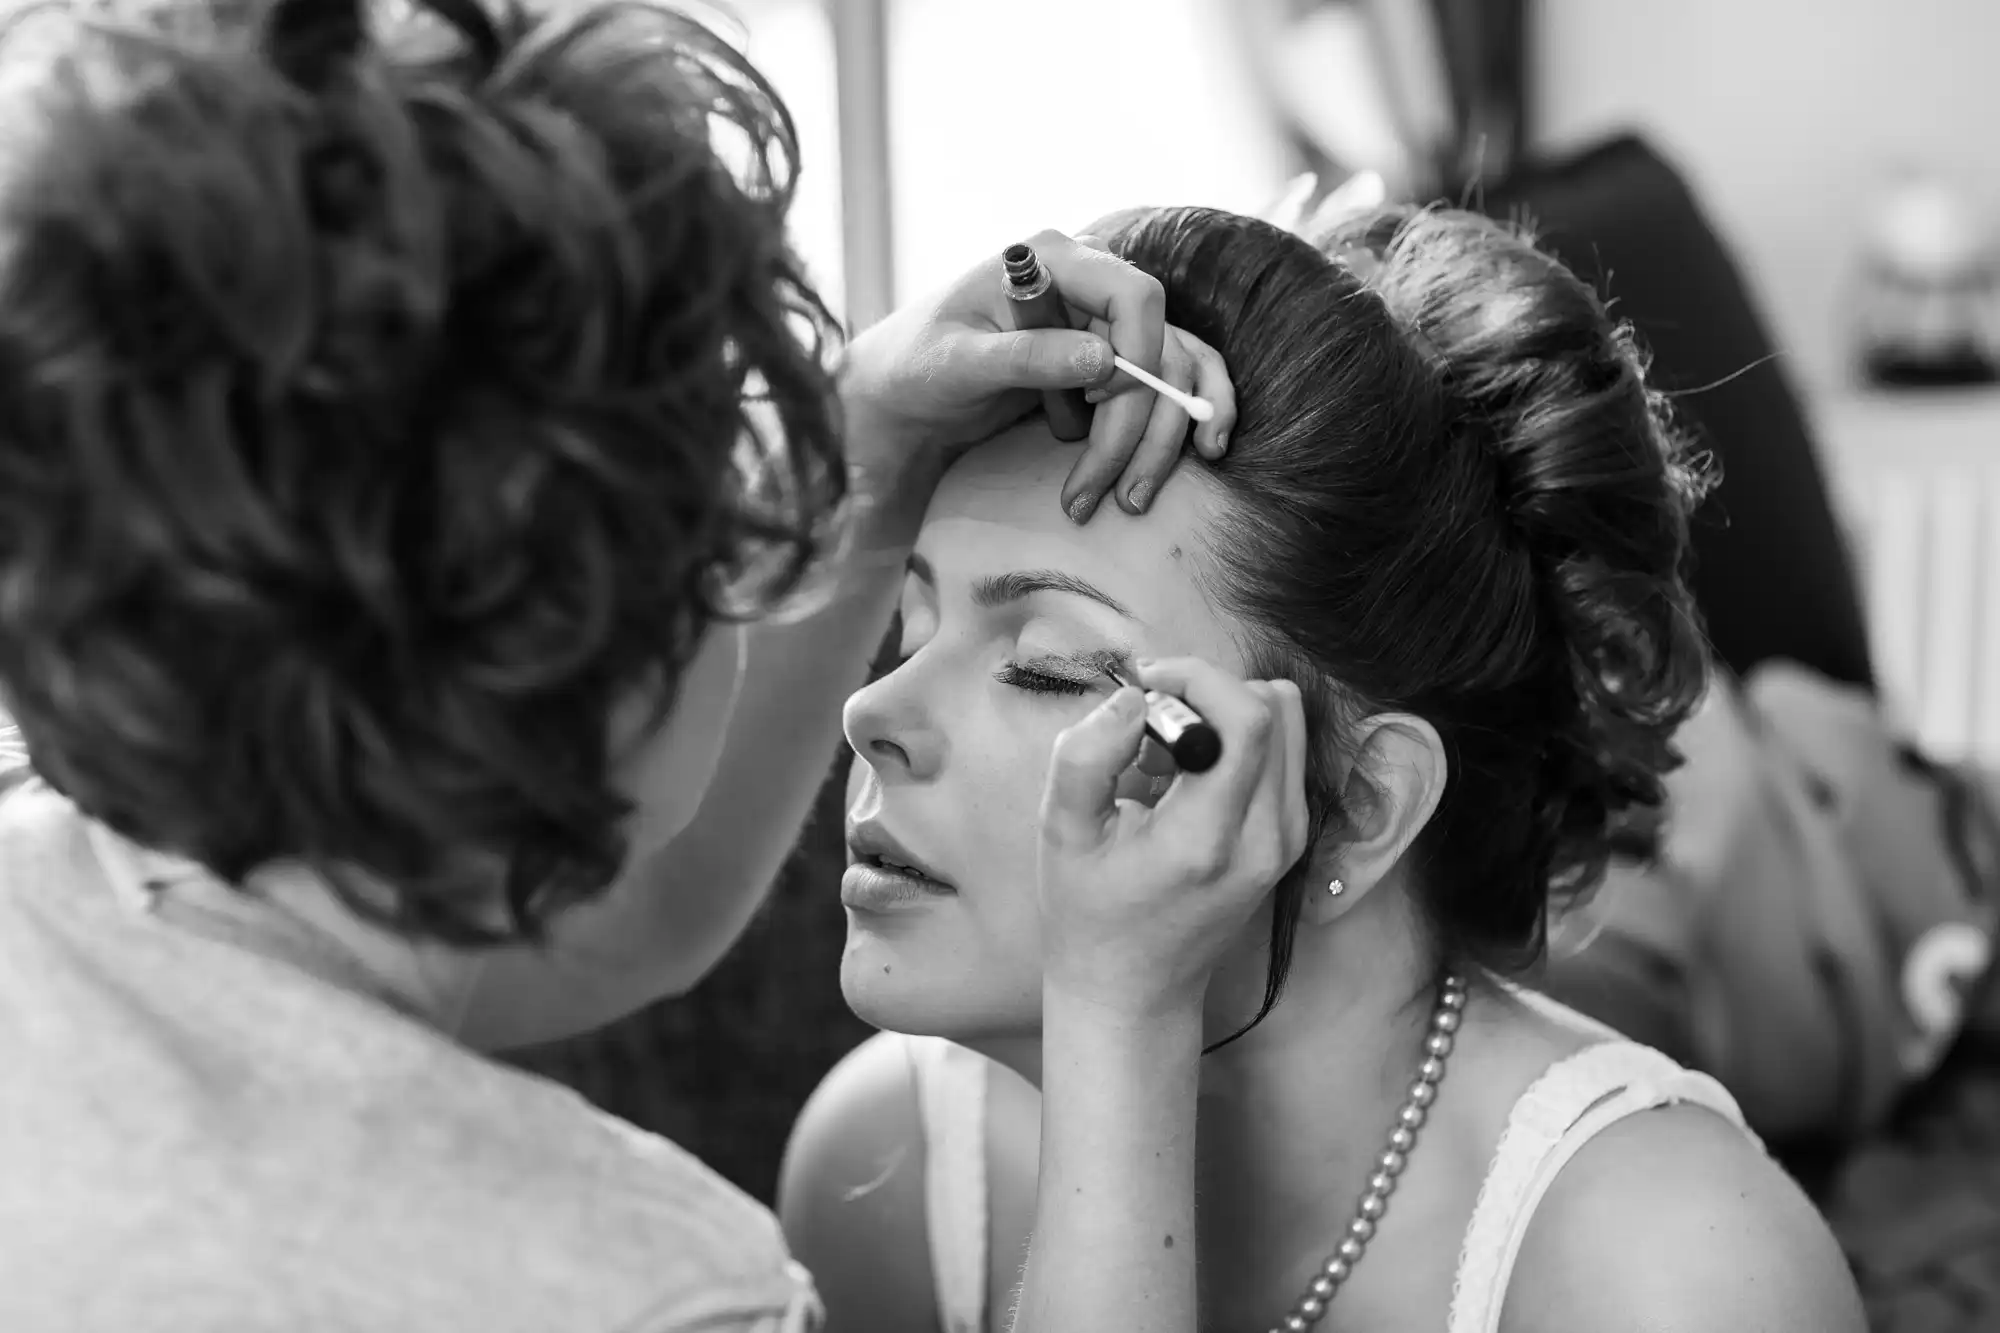 A woman applies eye makeup to another woman in a black and white photograph.